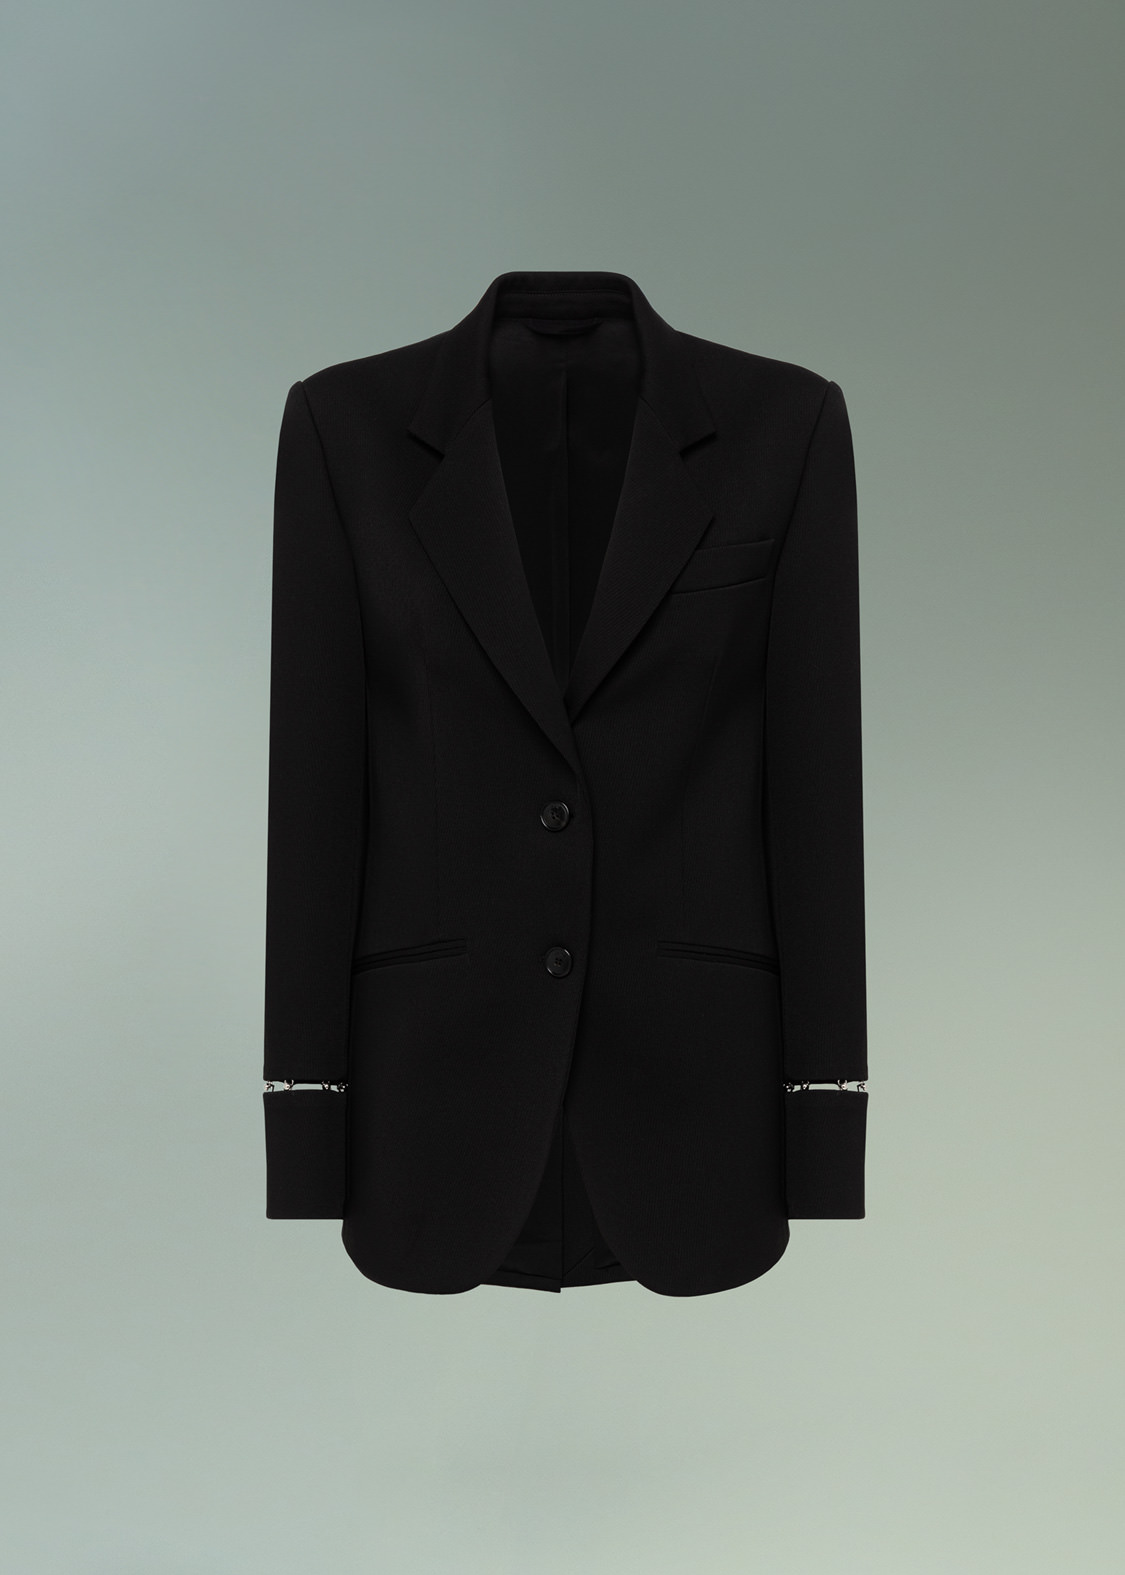 DEL CORE: SINGLE BREASTED  TAILORED JACKET WITH MUSHROOM HOOK DETAIL ON SLEEVES